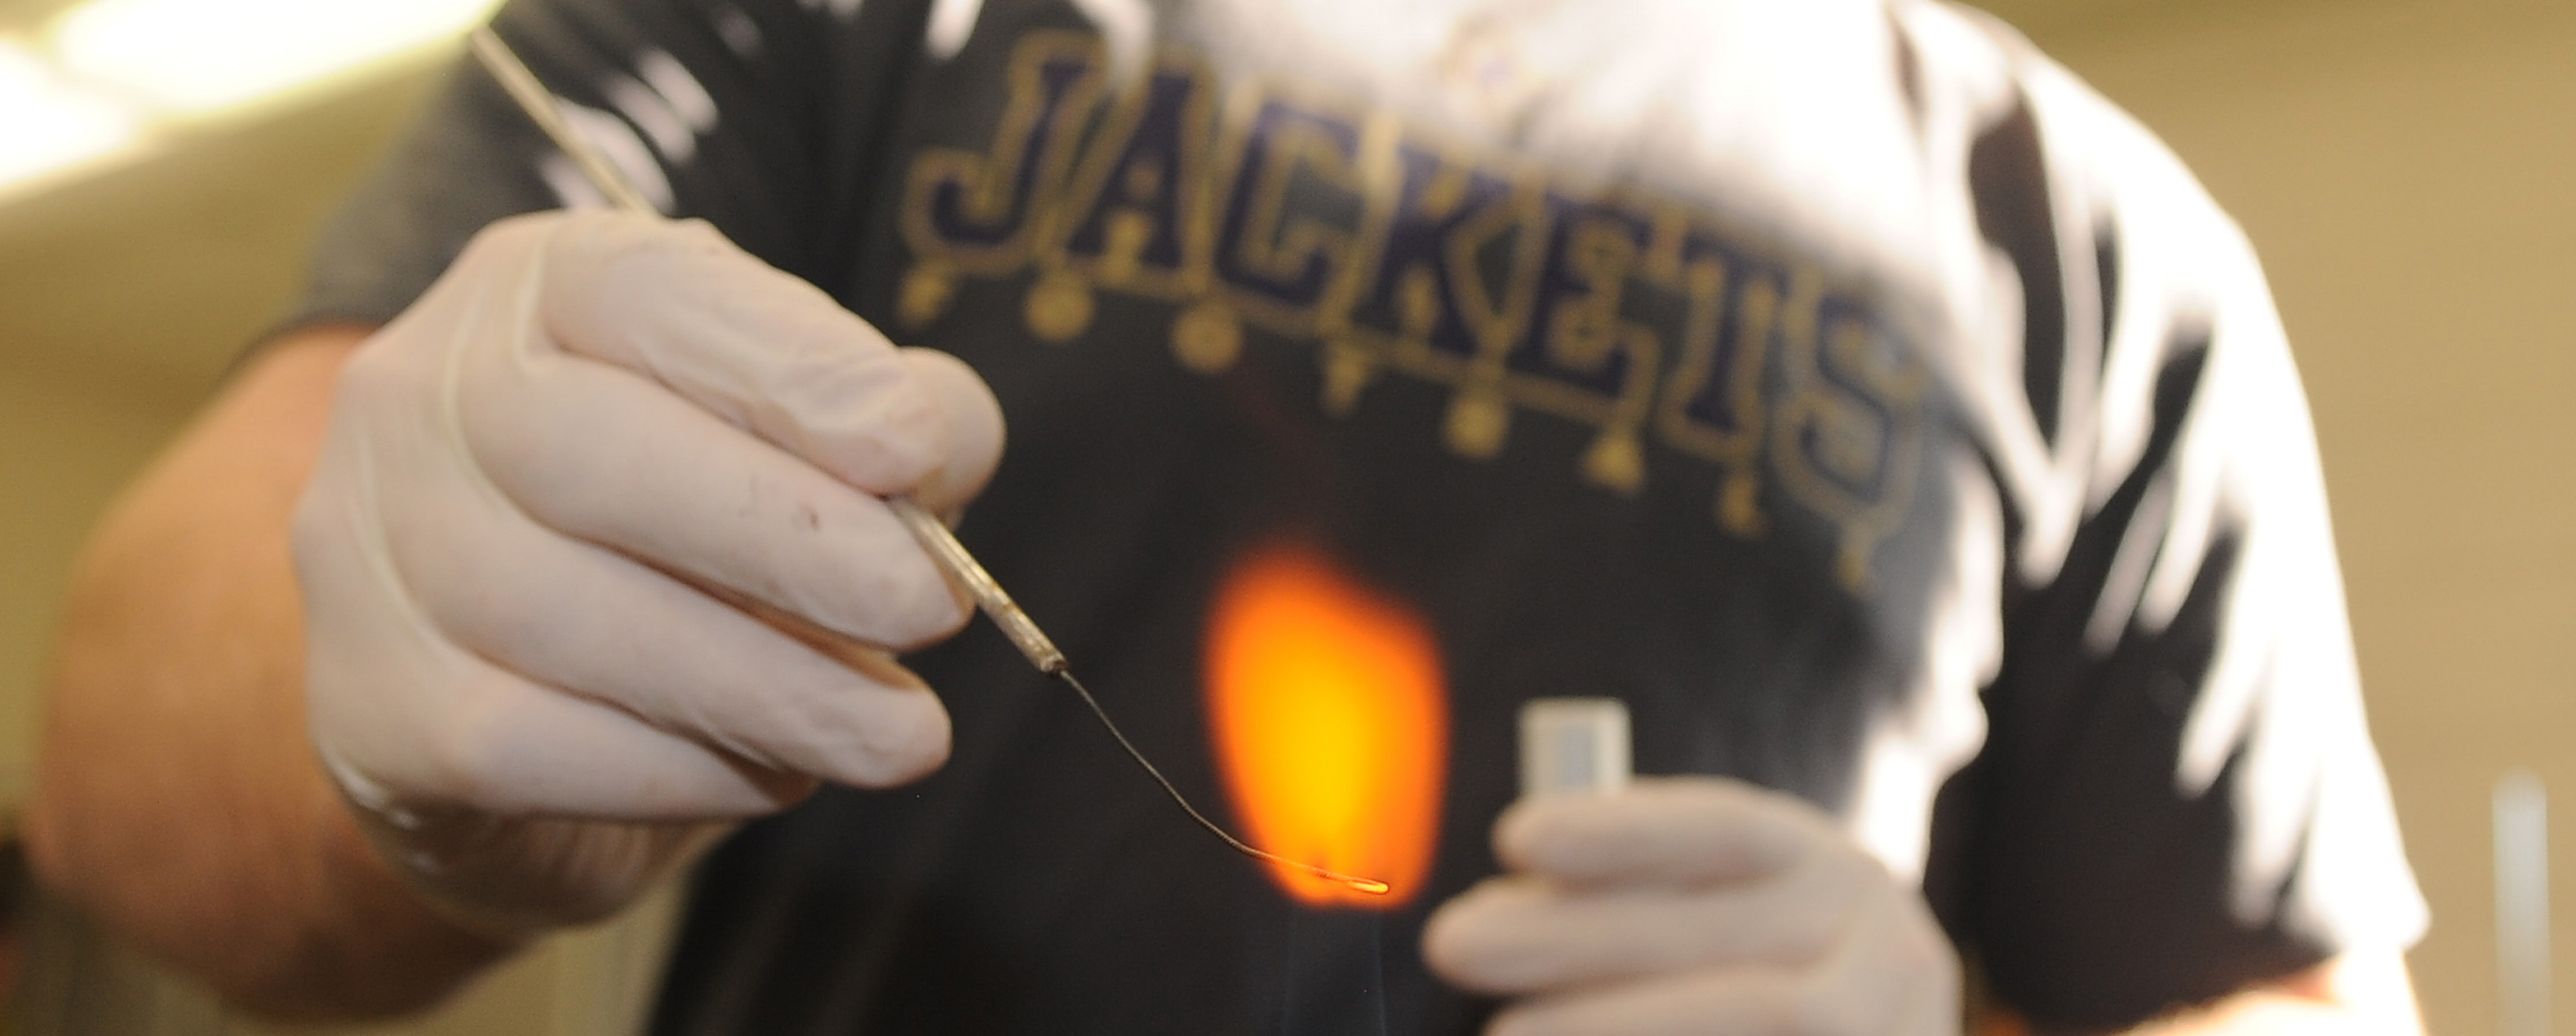 Close up of hands wearing rubber gloves heating a tool in a flame. Gloved hand in the background holding a test tube. Student's shirt is readable saying JACKETS Football.